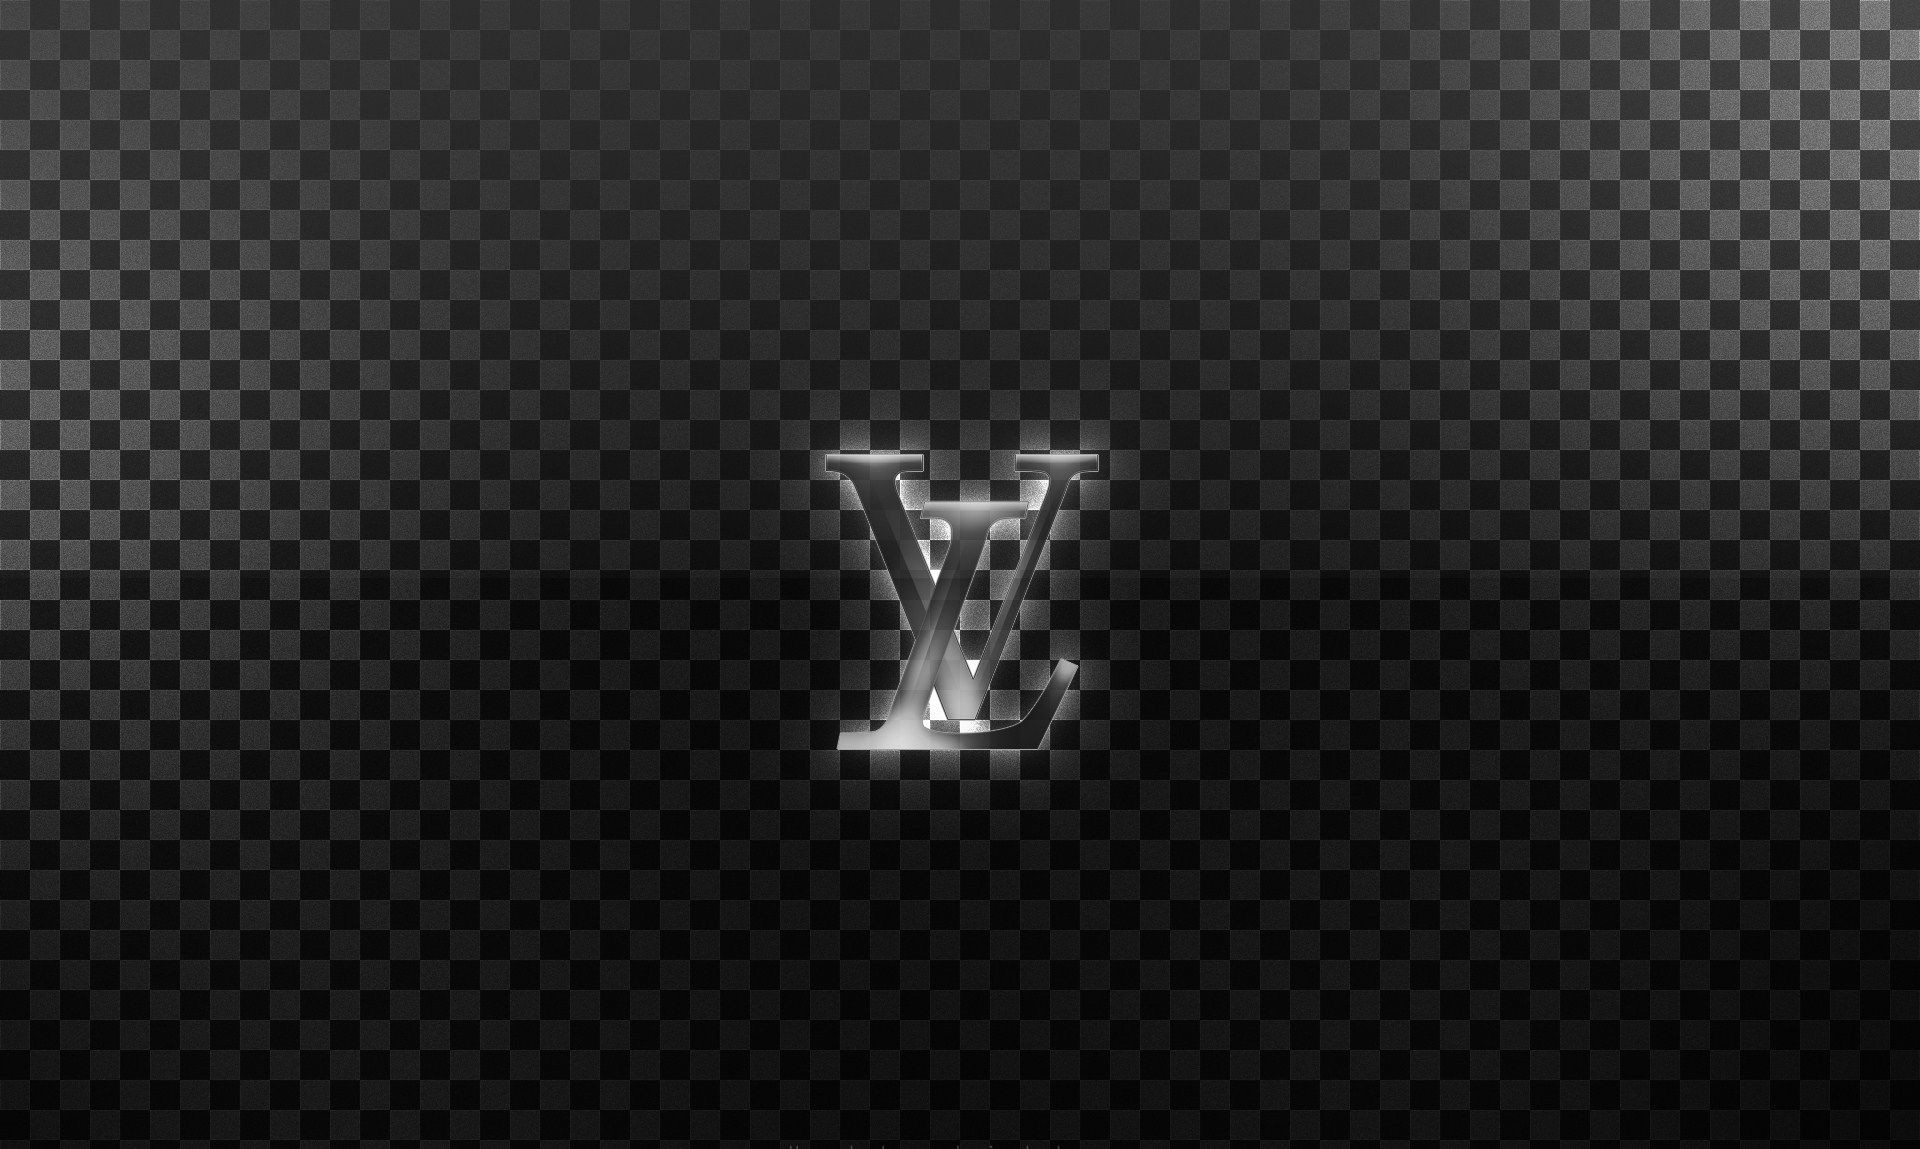 logo louis vuitton backgrounds pictures download hd background wallpapers  free amazing cool tablet smart phone high